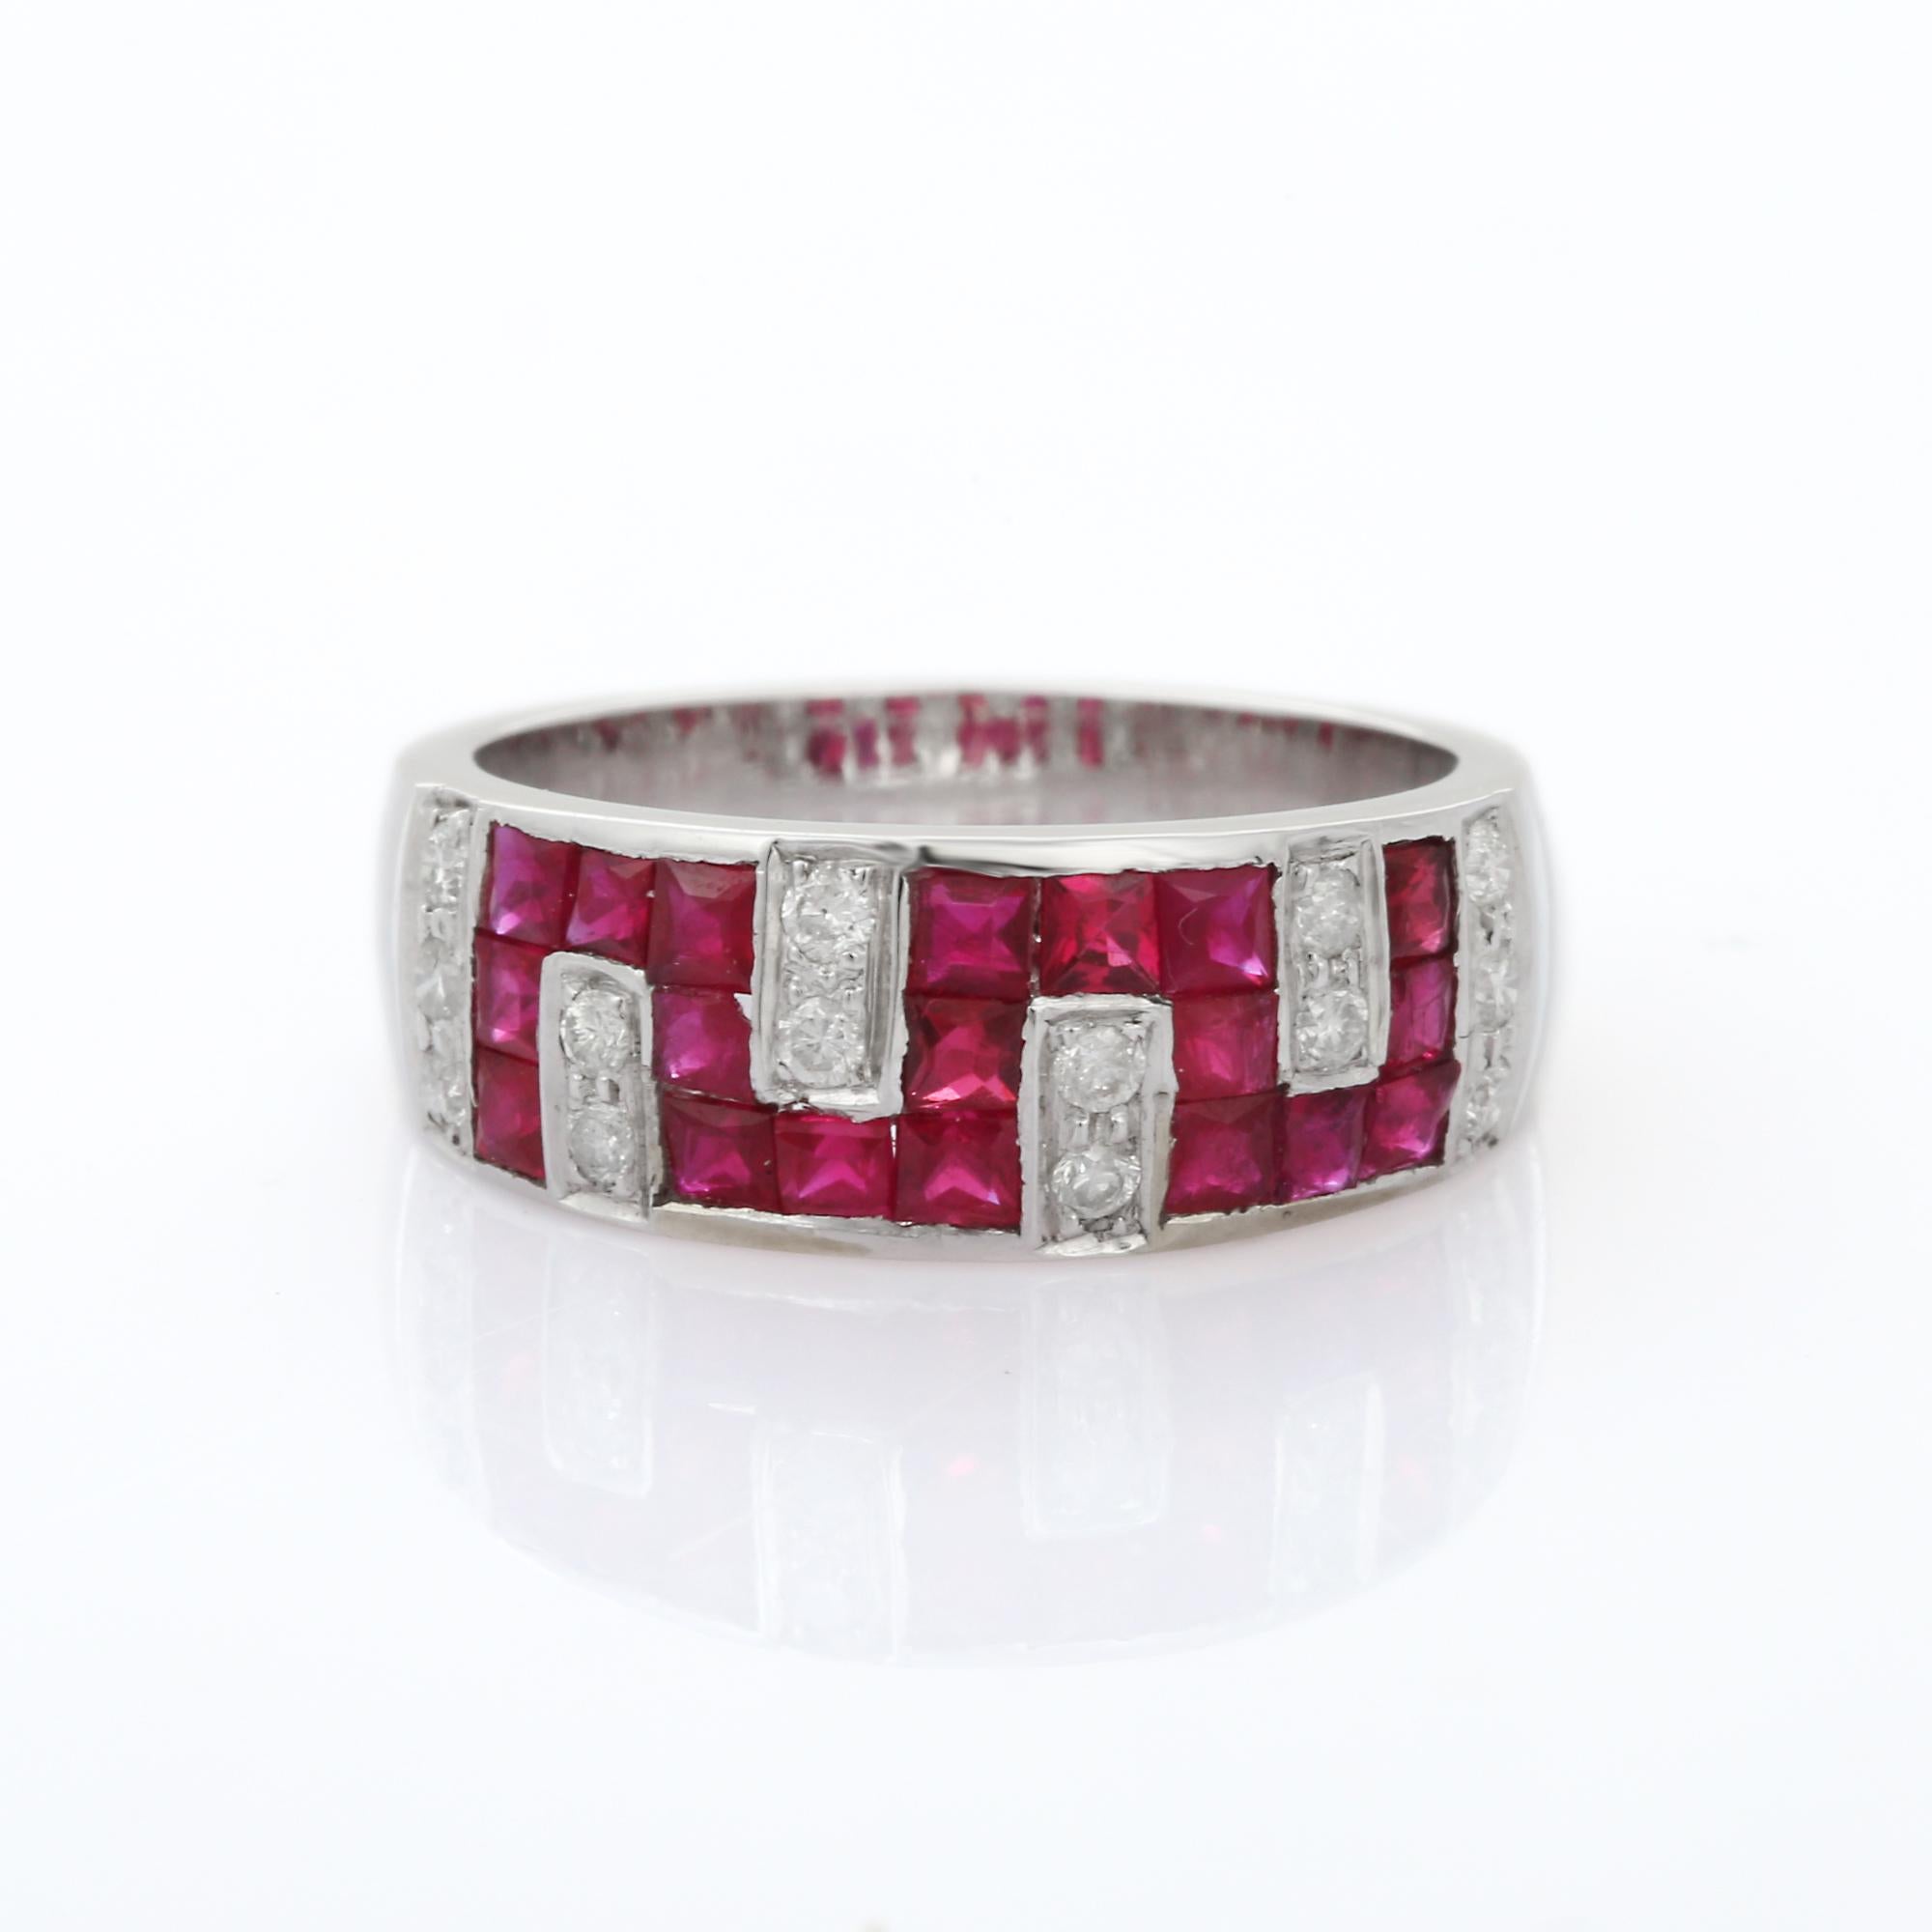 For Sale:  Classical Greek Style Ruby Diamond Band Ring in 18K Solid White Gold  9